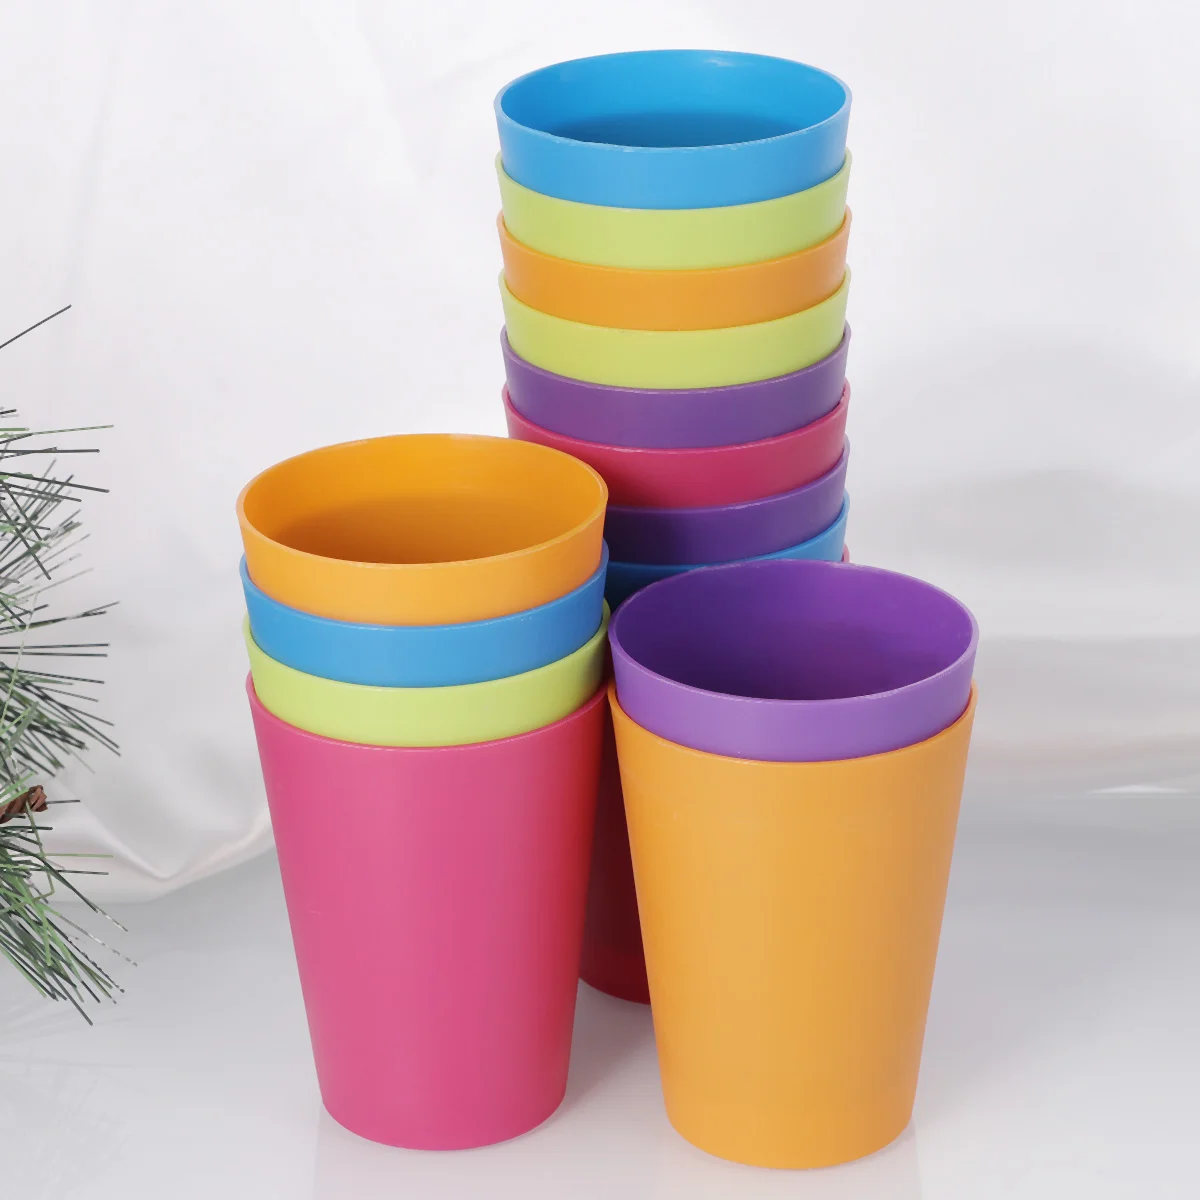 

15pcs Colorful Plastic Cups Home Beverage Drinking Cup Reusable Holiday Party Tableware and Party Supplies 101-200ml (Mixed